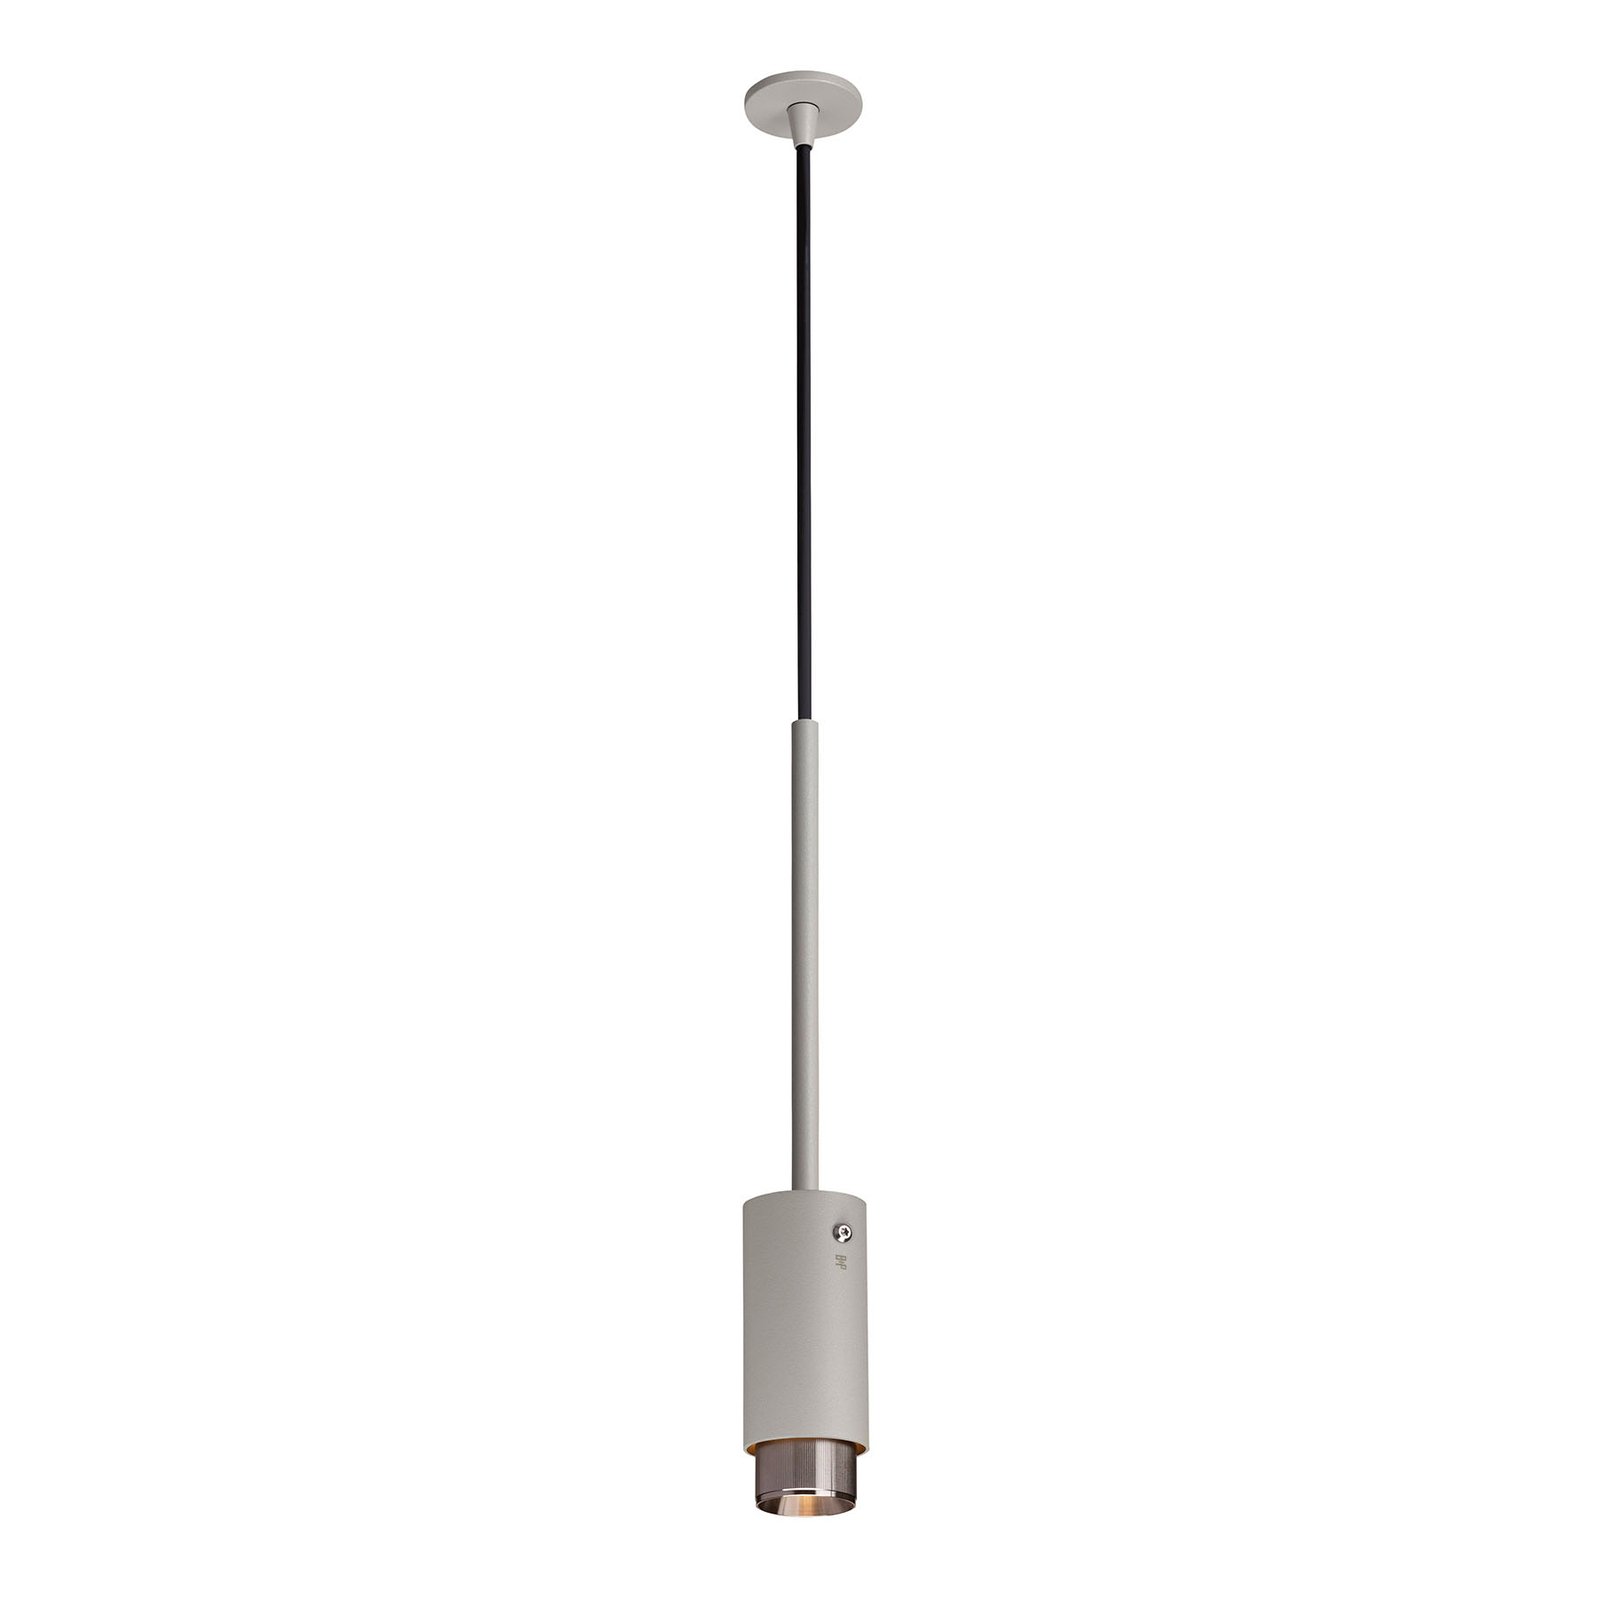 Buster + Punch Exhaust hanging light grey/steel